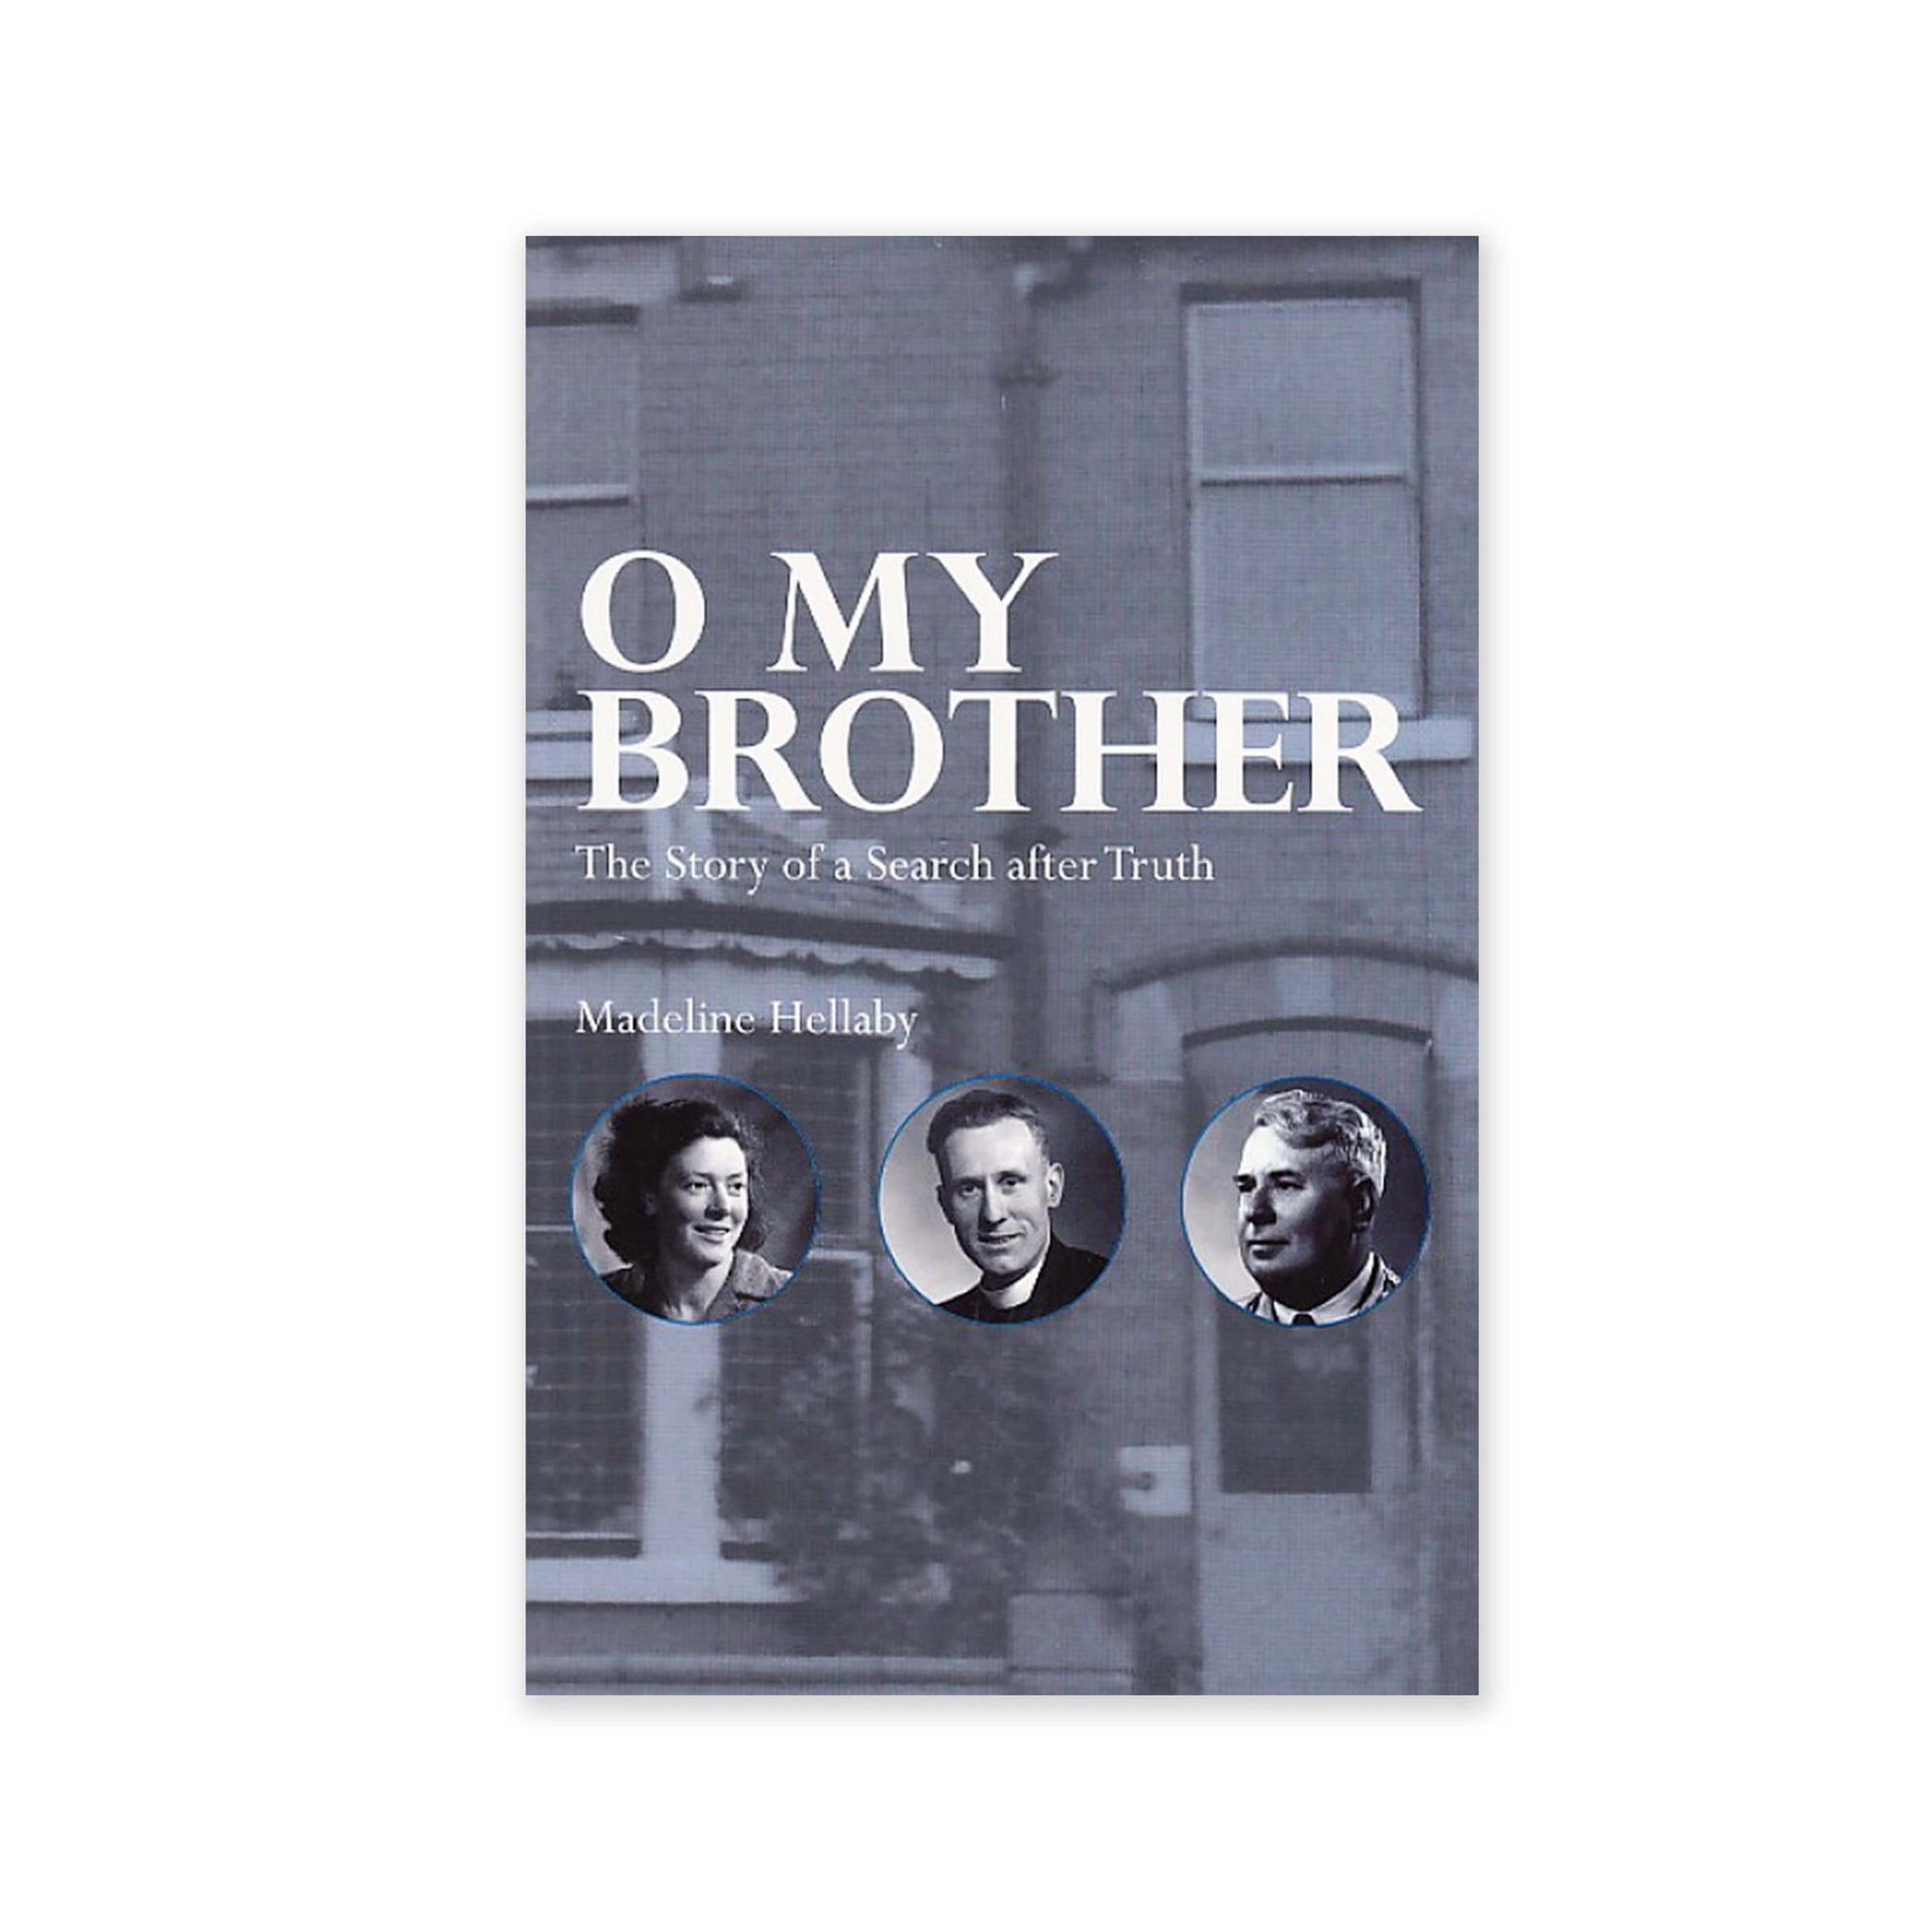 O My Brother - The Story of a Search After Truth